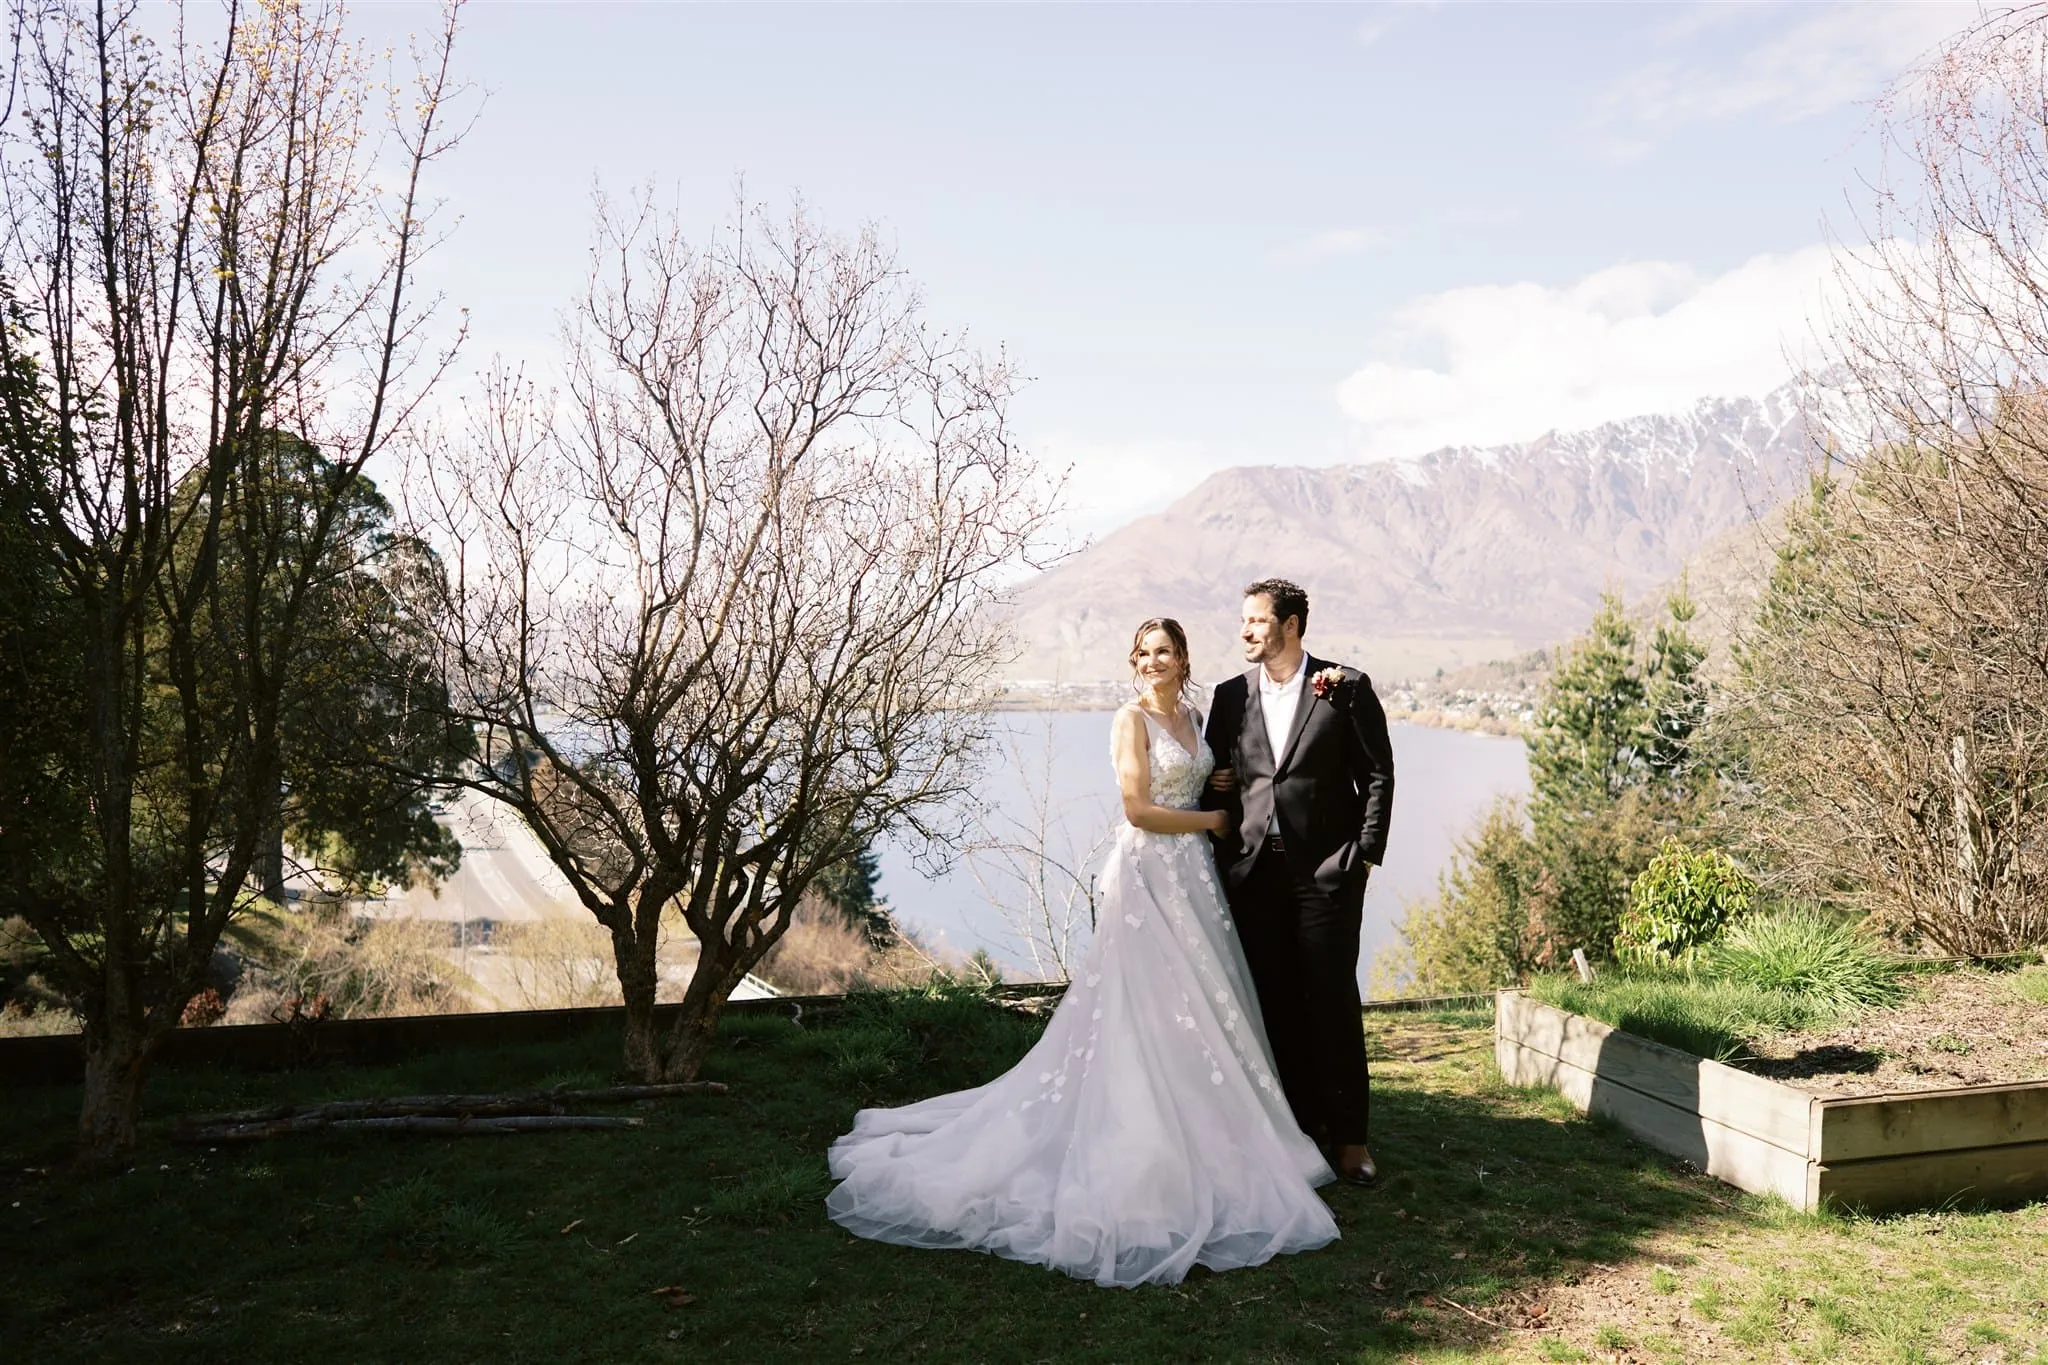 Queenstown New Zealand Elopement Wedding Photographer - A bride and groom, Alex & Shahar, posing in front of a lake during their Queenstown elopement.